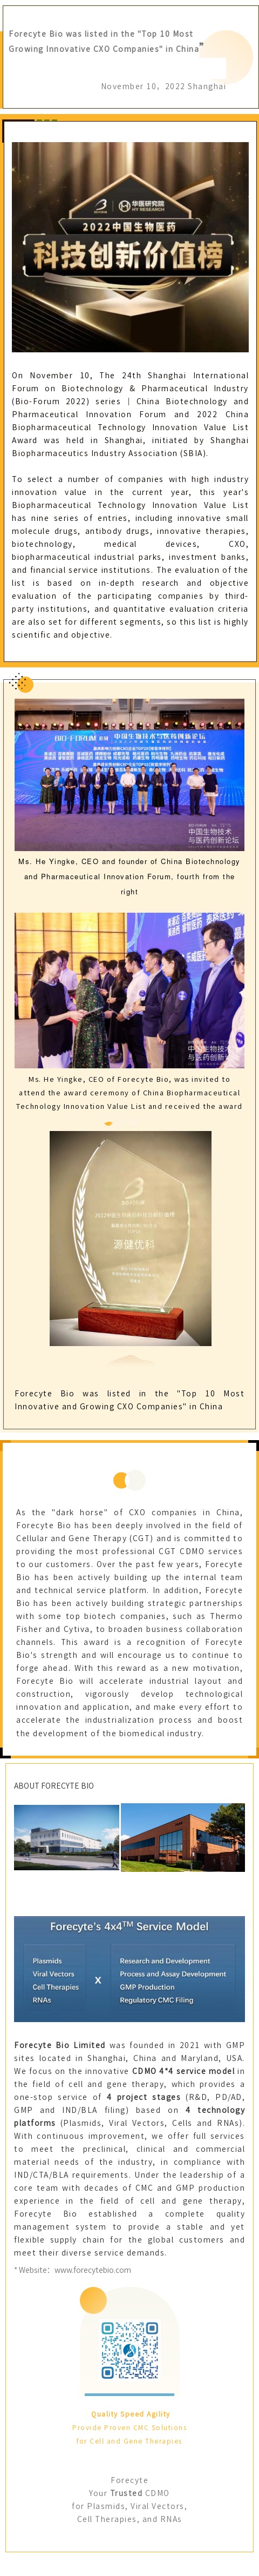 Forecyte Bio was listed in the "Top 10 Most Growing Innovative CXO Companies" in China” 